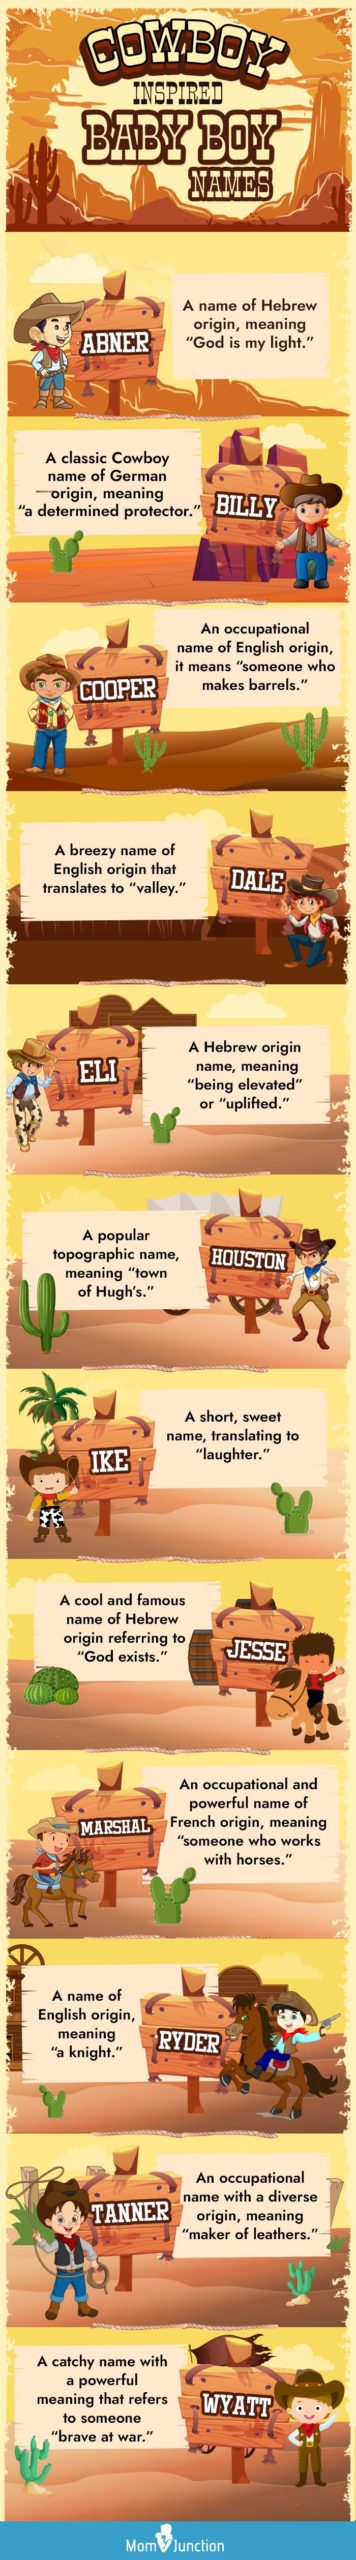 cowboy inspired baby boy names (infographic)